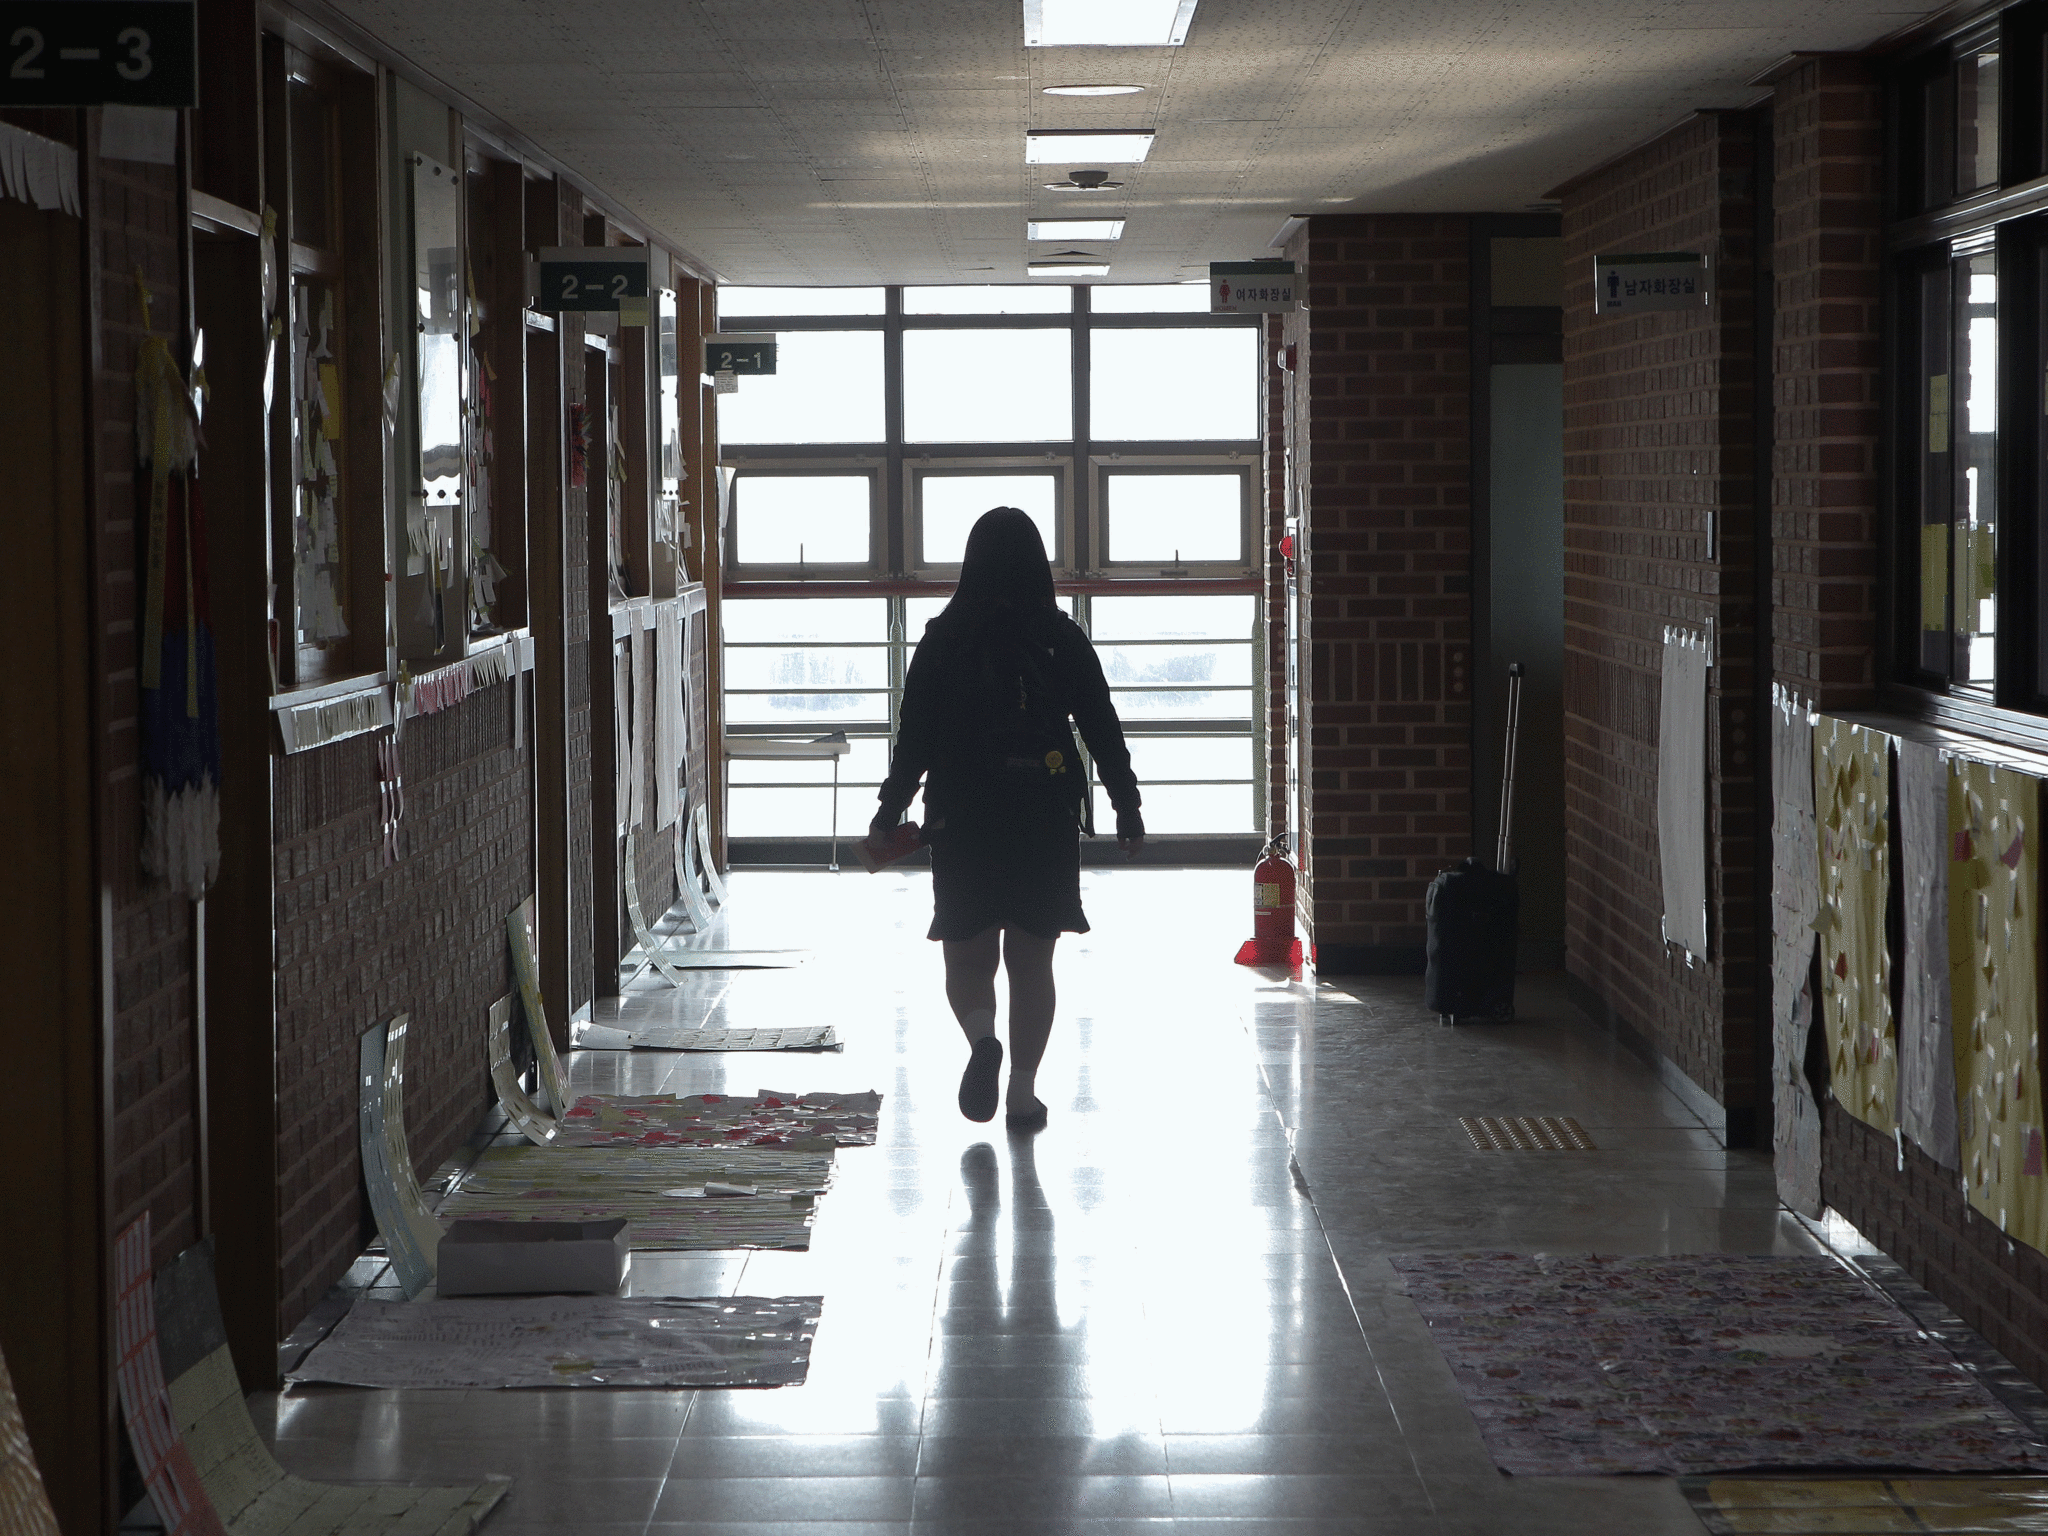 A school is arguing a 13-year-old girl was partly to blame for her sexual abuse by a teacher